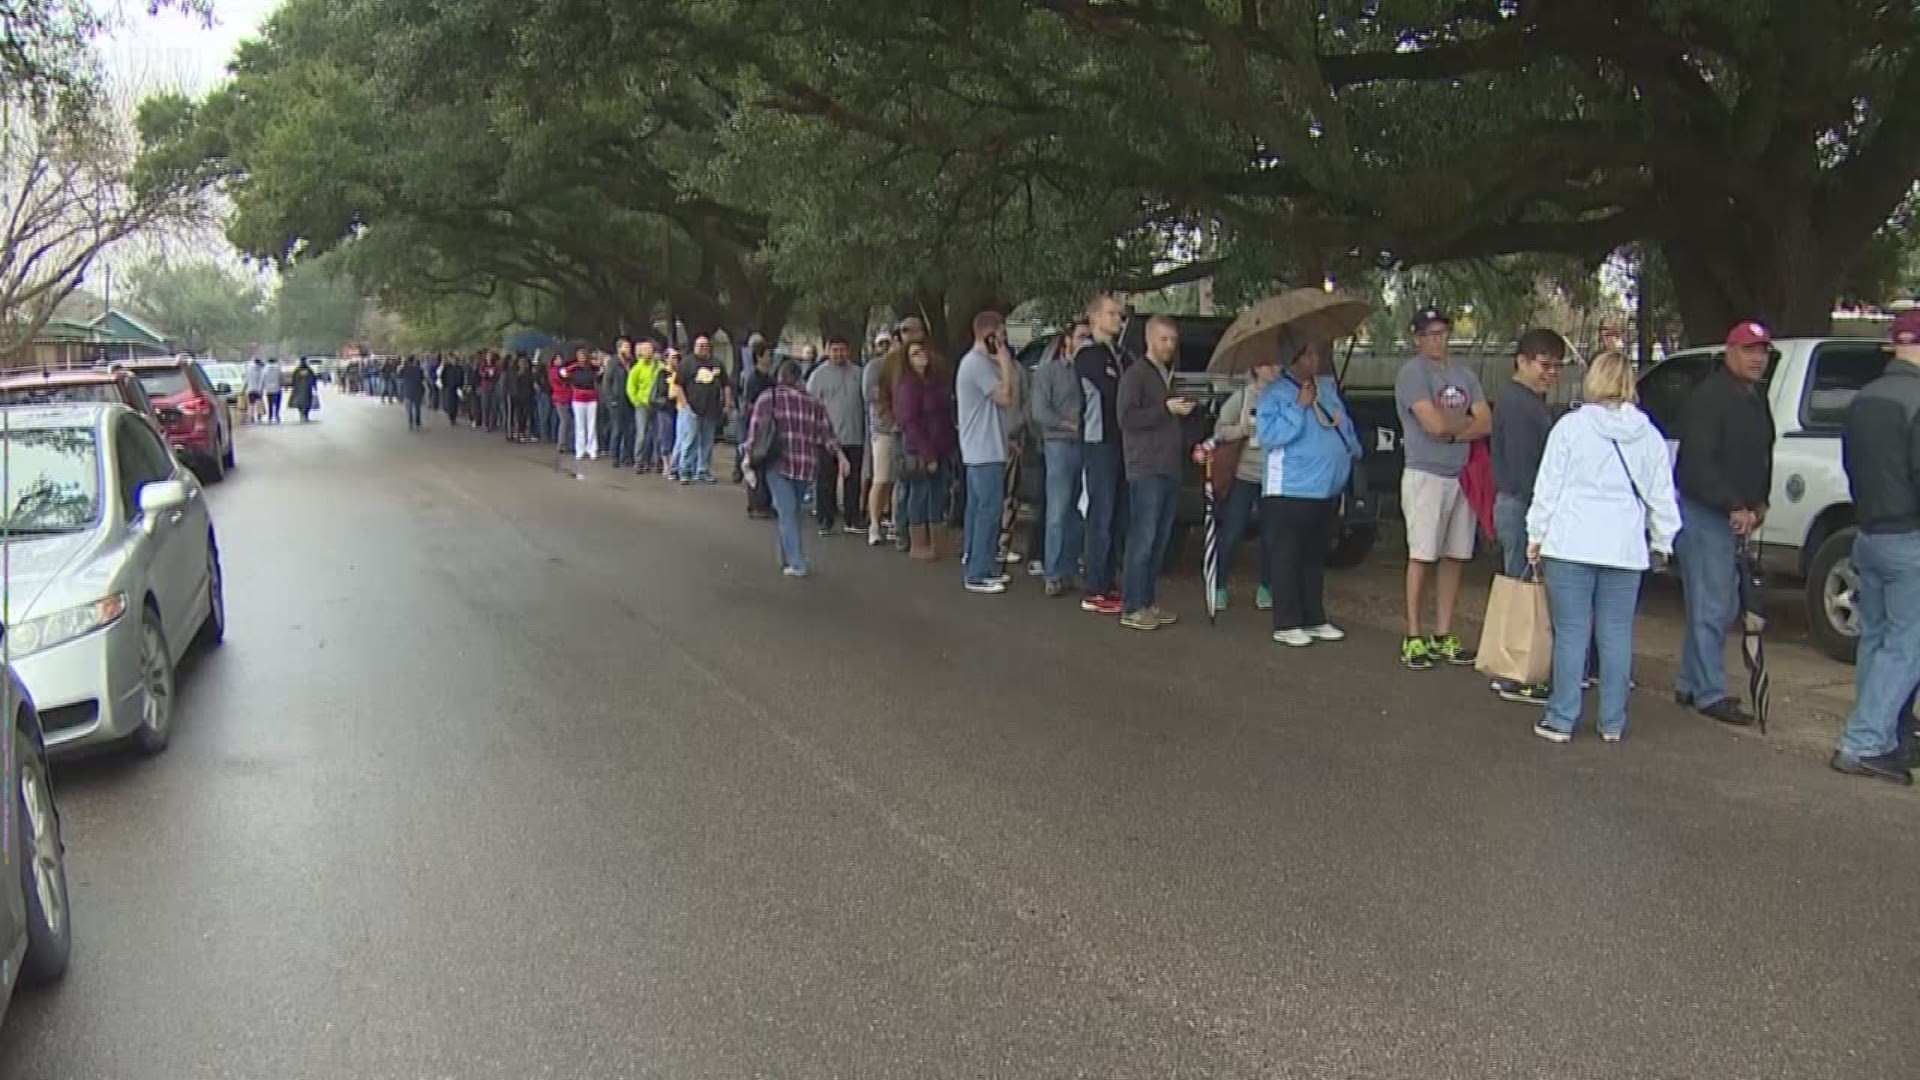 If you grill it, they will come -- especially if it's a free family meal from one of the best barbecue joints around. Hundreds of federal workers who aren't being paid during the government shutdown lined up at Killen's Bar-B-Que Friday morning for the Fu